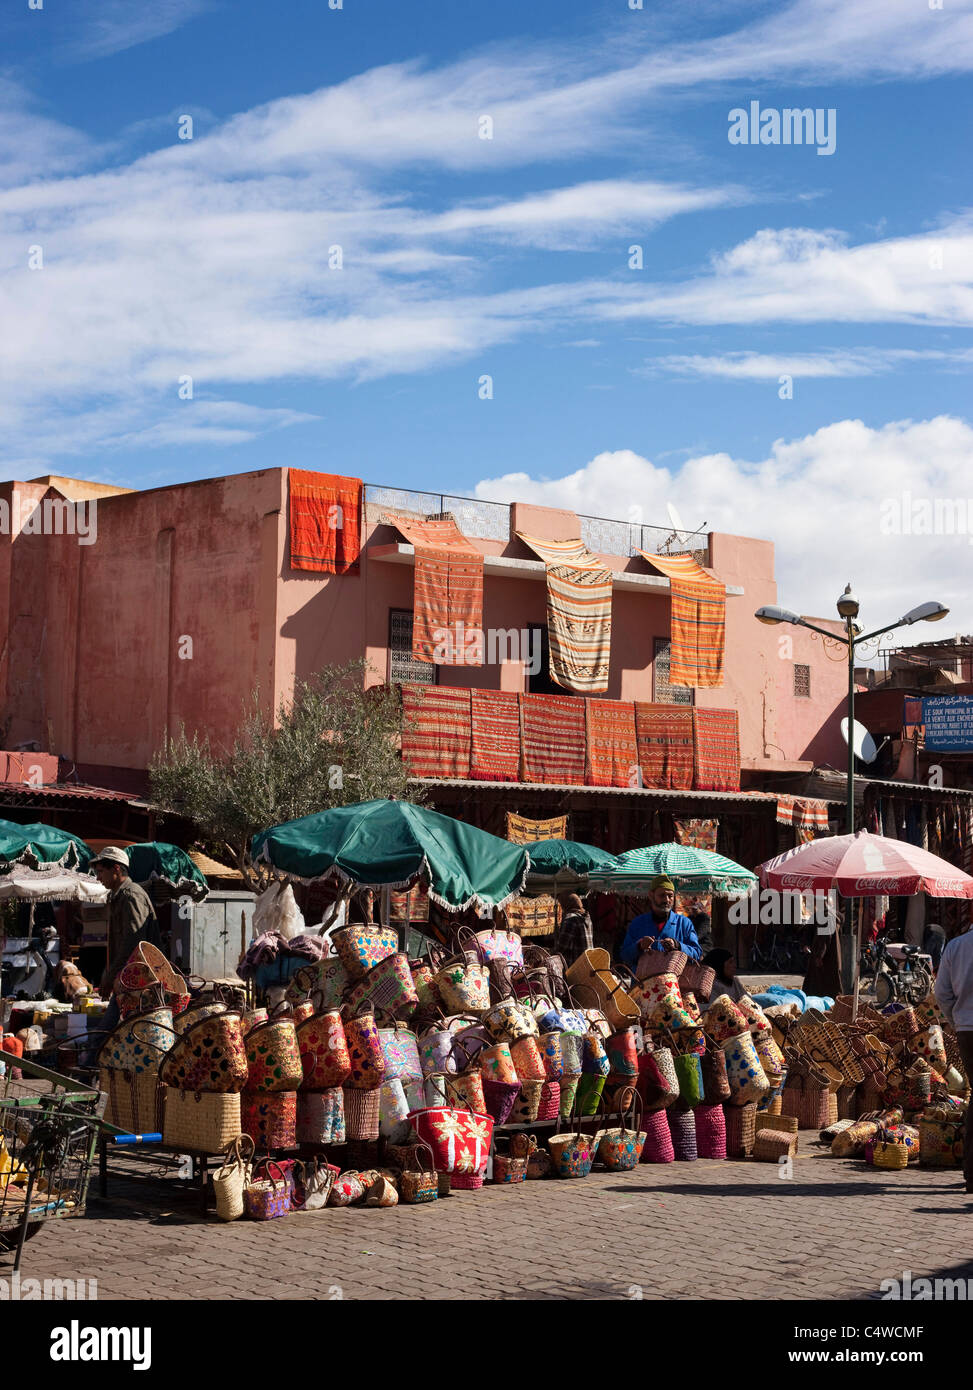 The colourful market stalls or Souks in the central Medina. Marrakech, Morocco. Stock Photo